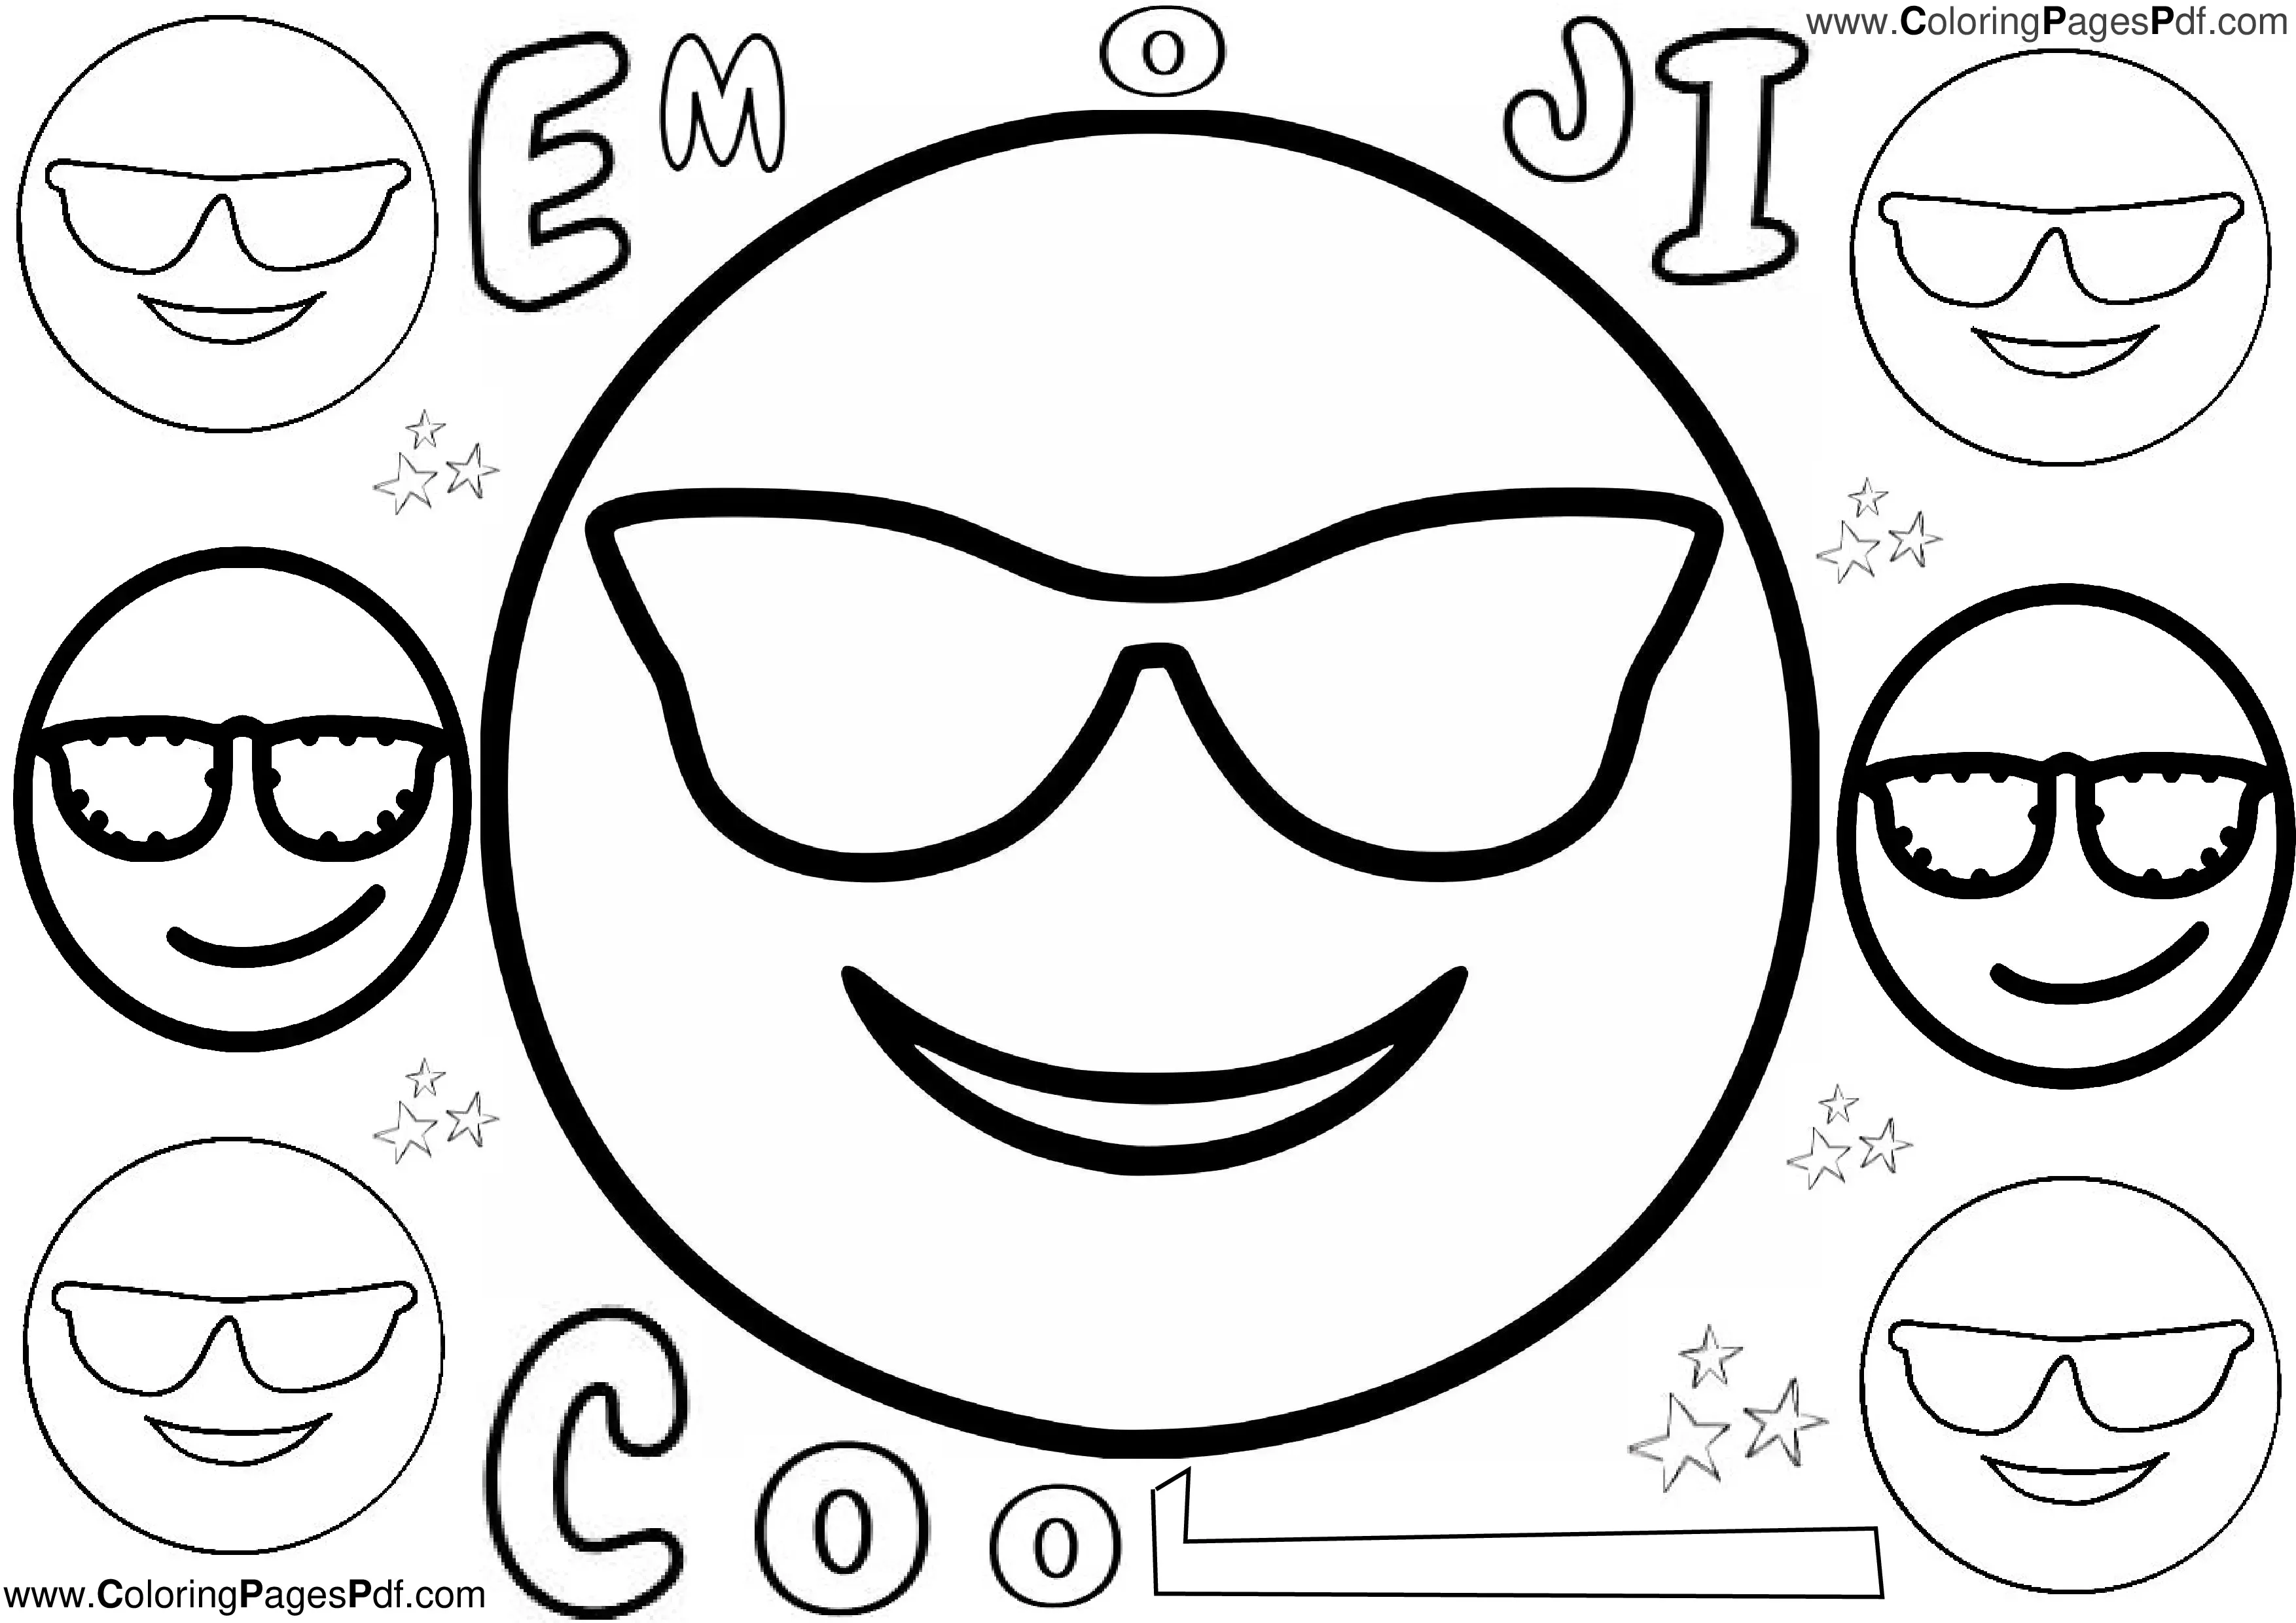 Cool Emoji Coloring Pages